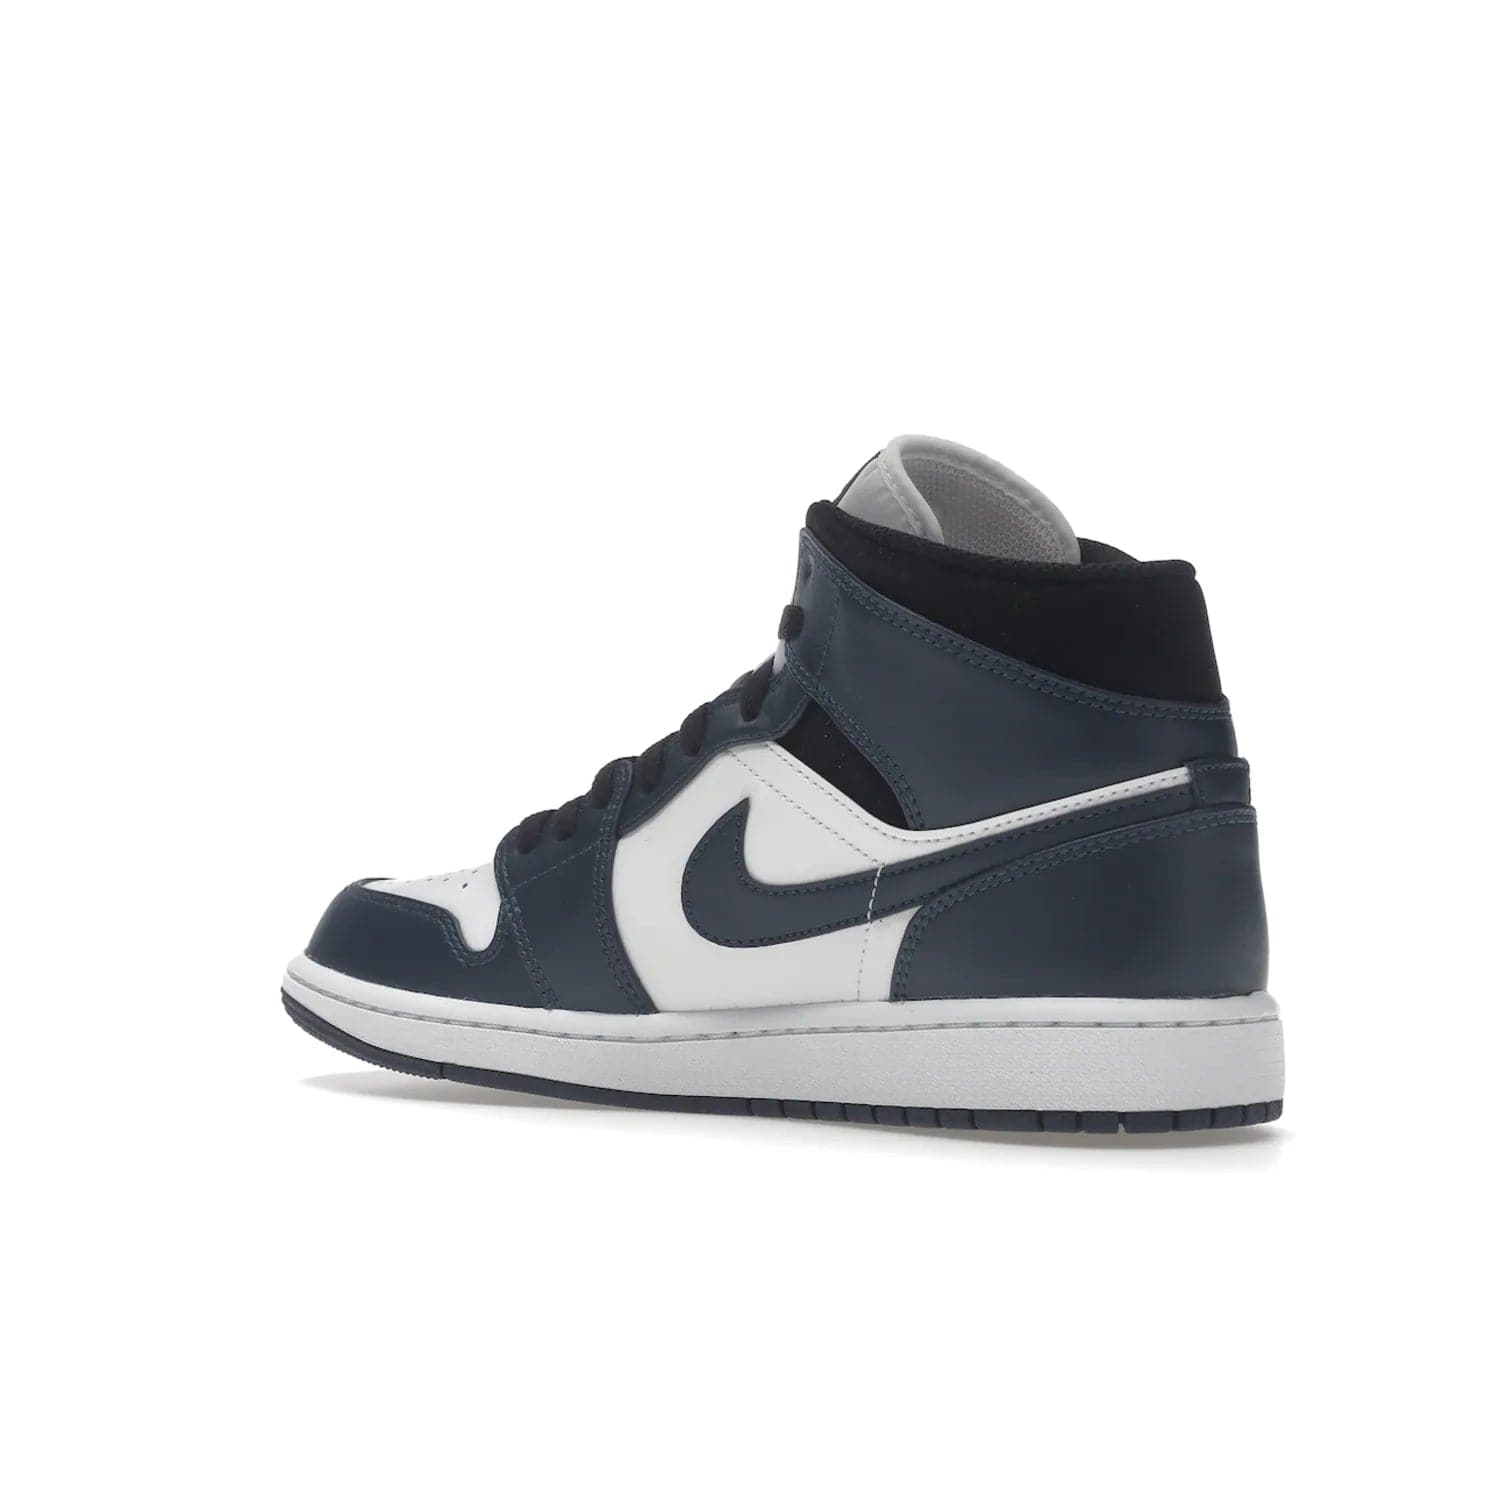 Jordan 1 Mid Armory Navy - Image 23 - Only at www.BallersClubKickz.com - The Jordan 1 Mid Armory Navy: classic basketball sneaker with soft white leather upper, deep navy blue overlays, and black leather ankle detailing. Iconic style with Jordan Wings logo and Jumpman label.